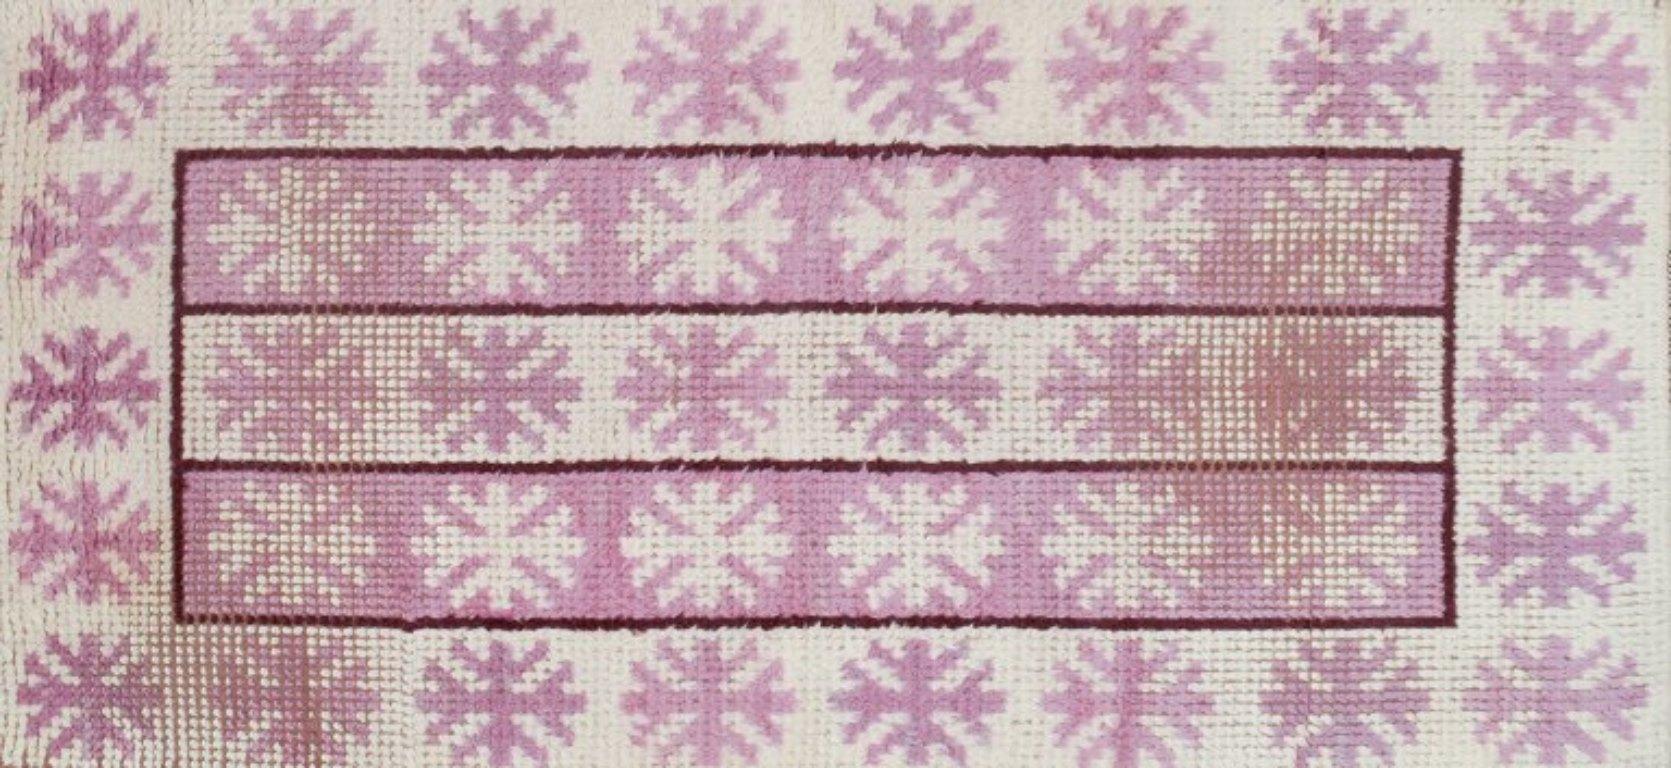 Märta Måås-Fjetterström (1873–1941), Swedish textile designer.
Unique handwoven wool rya carpet in a modernist design. 
Pink and white in a geometric pattern.
First half of the 20th century.
Signed MMF.
Dimensions: 207 cm x 90 cm with fringes.